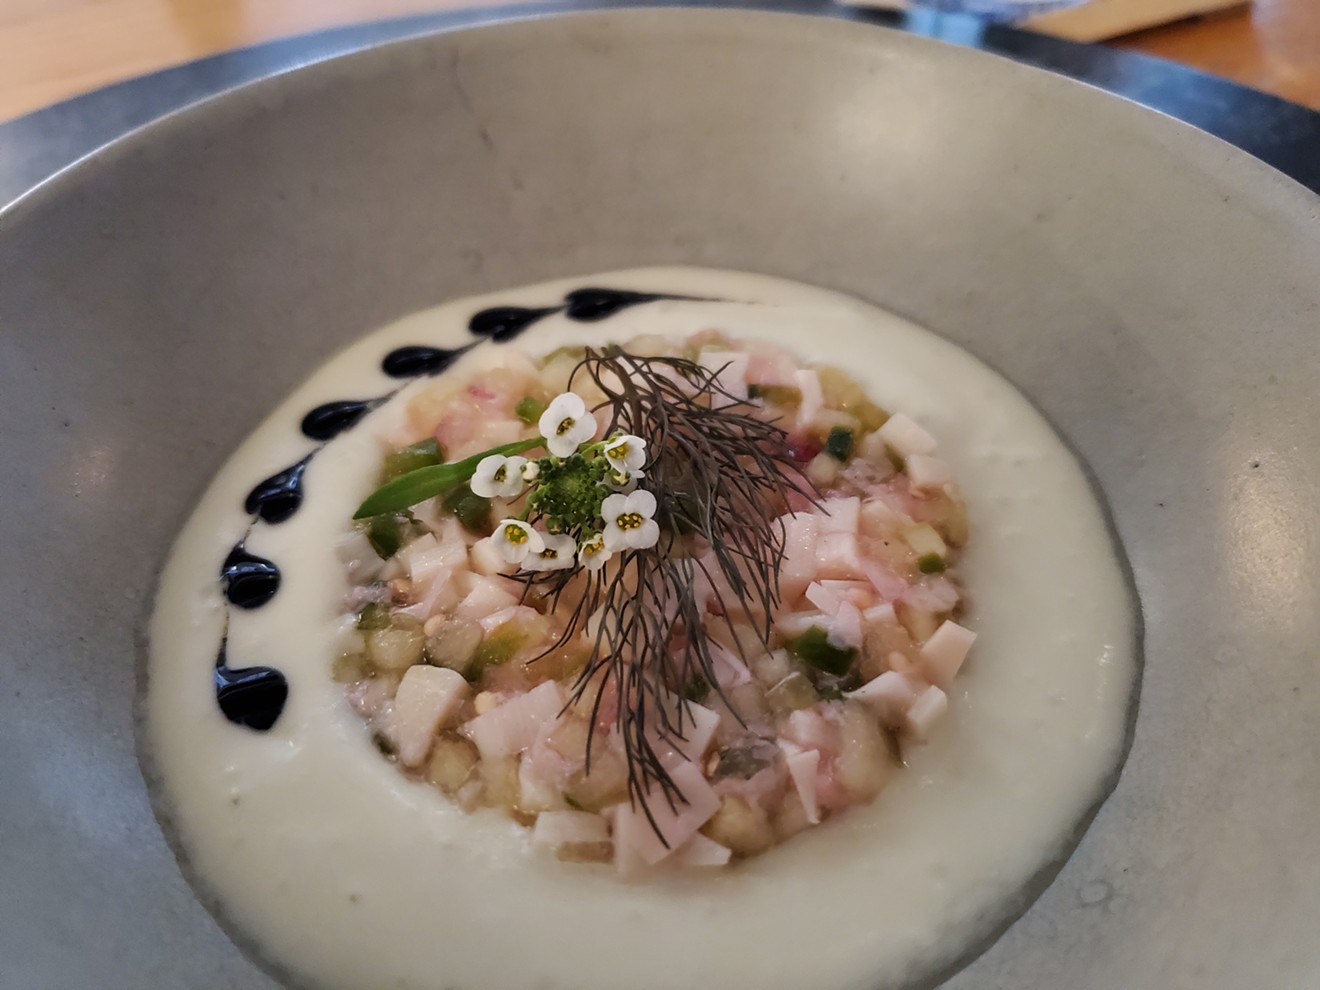 Ceviche made of hearts of palm from a meal at Bruto in April 2023.